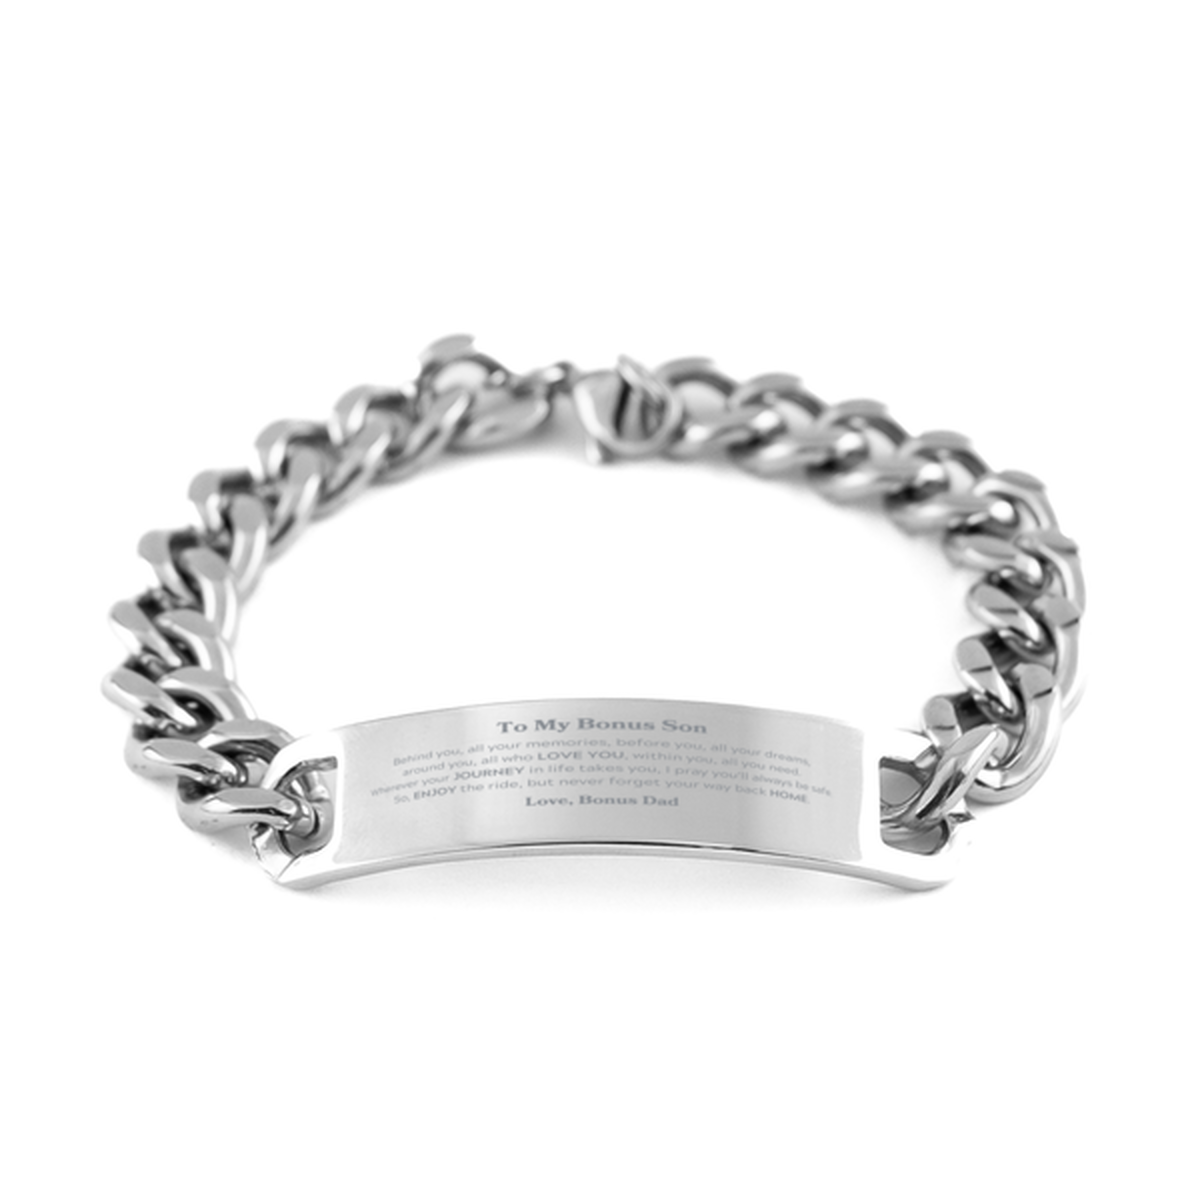 To My Bonus Son Graduation Gifts from Bonus Dad, Bonus Son Cuban Chain Stainless Steel Bracelet Christmas Birthday Gifts for Bonus Son Behind you, all your memories, before you, all your dreams. Love, Bonus Dad